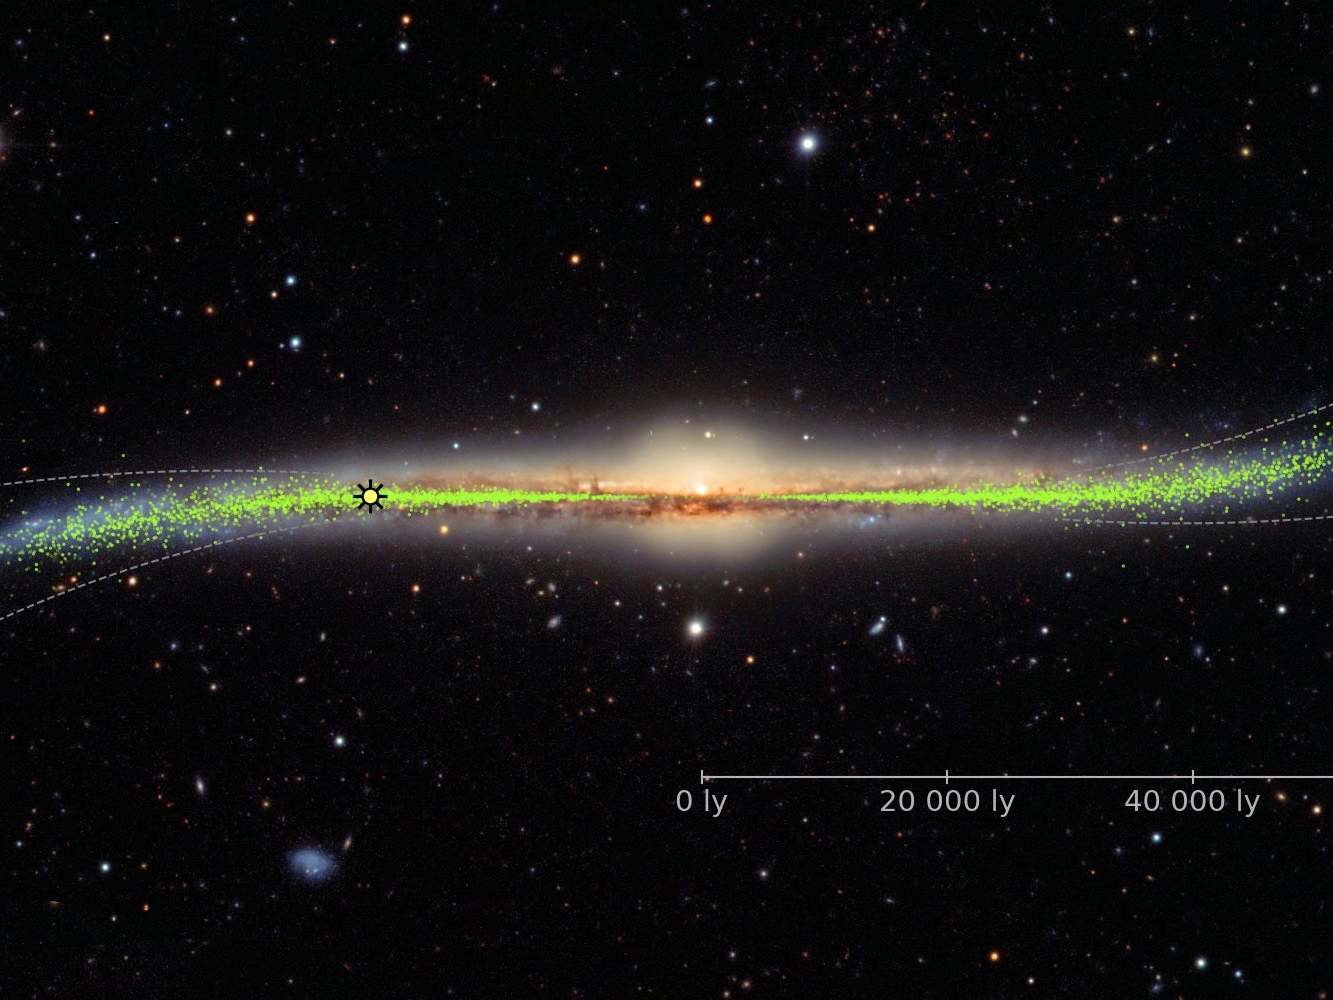 The Milky Way was previously thought to be a flat disc but fresh analysis reveals a different story